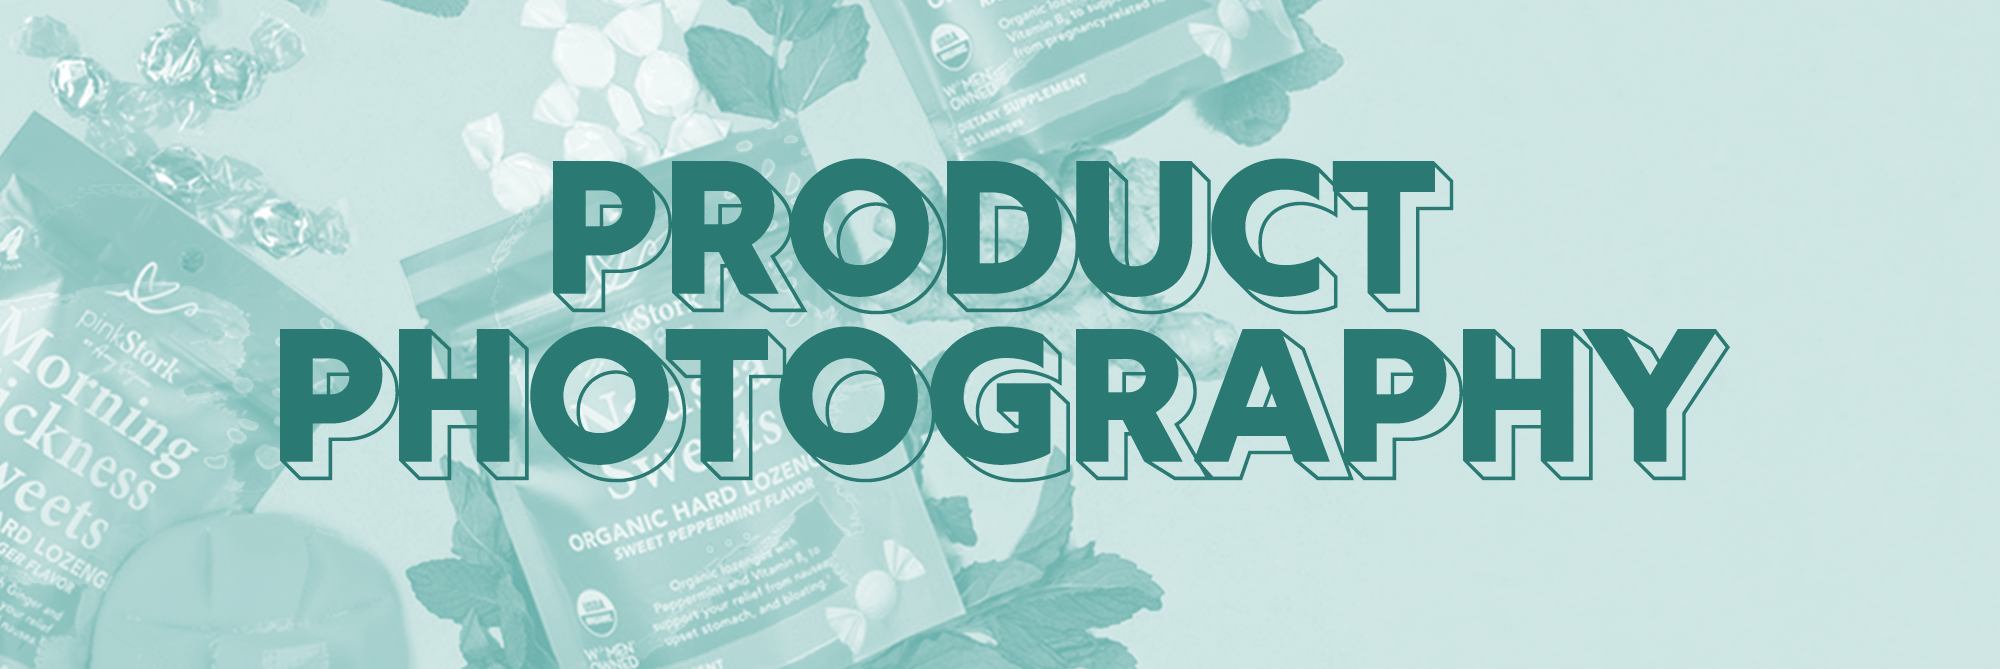 Product Photography Banner